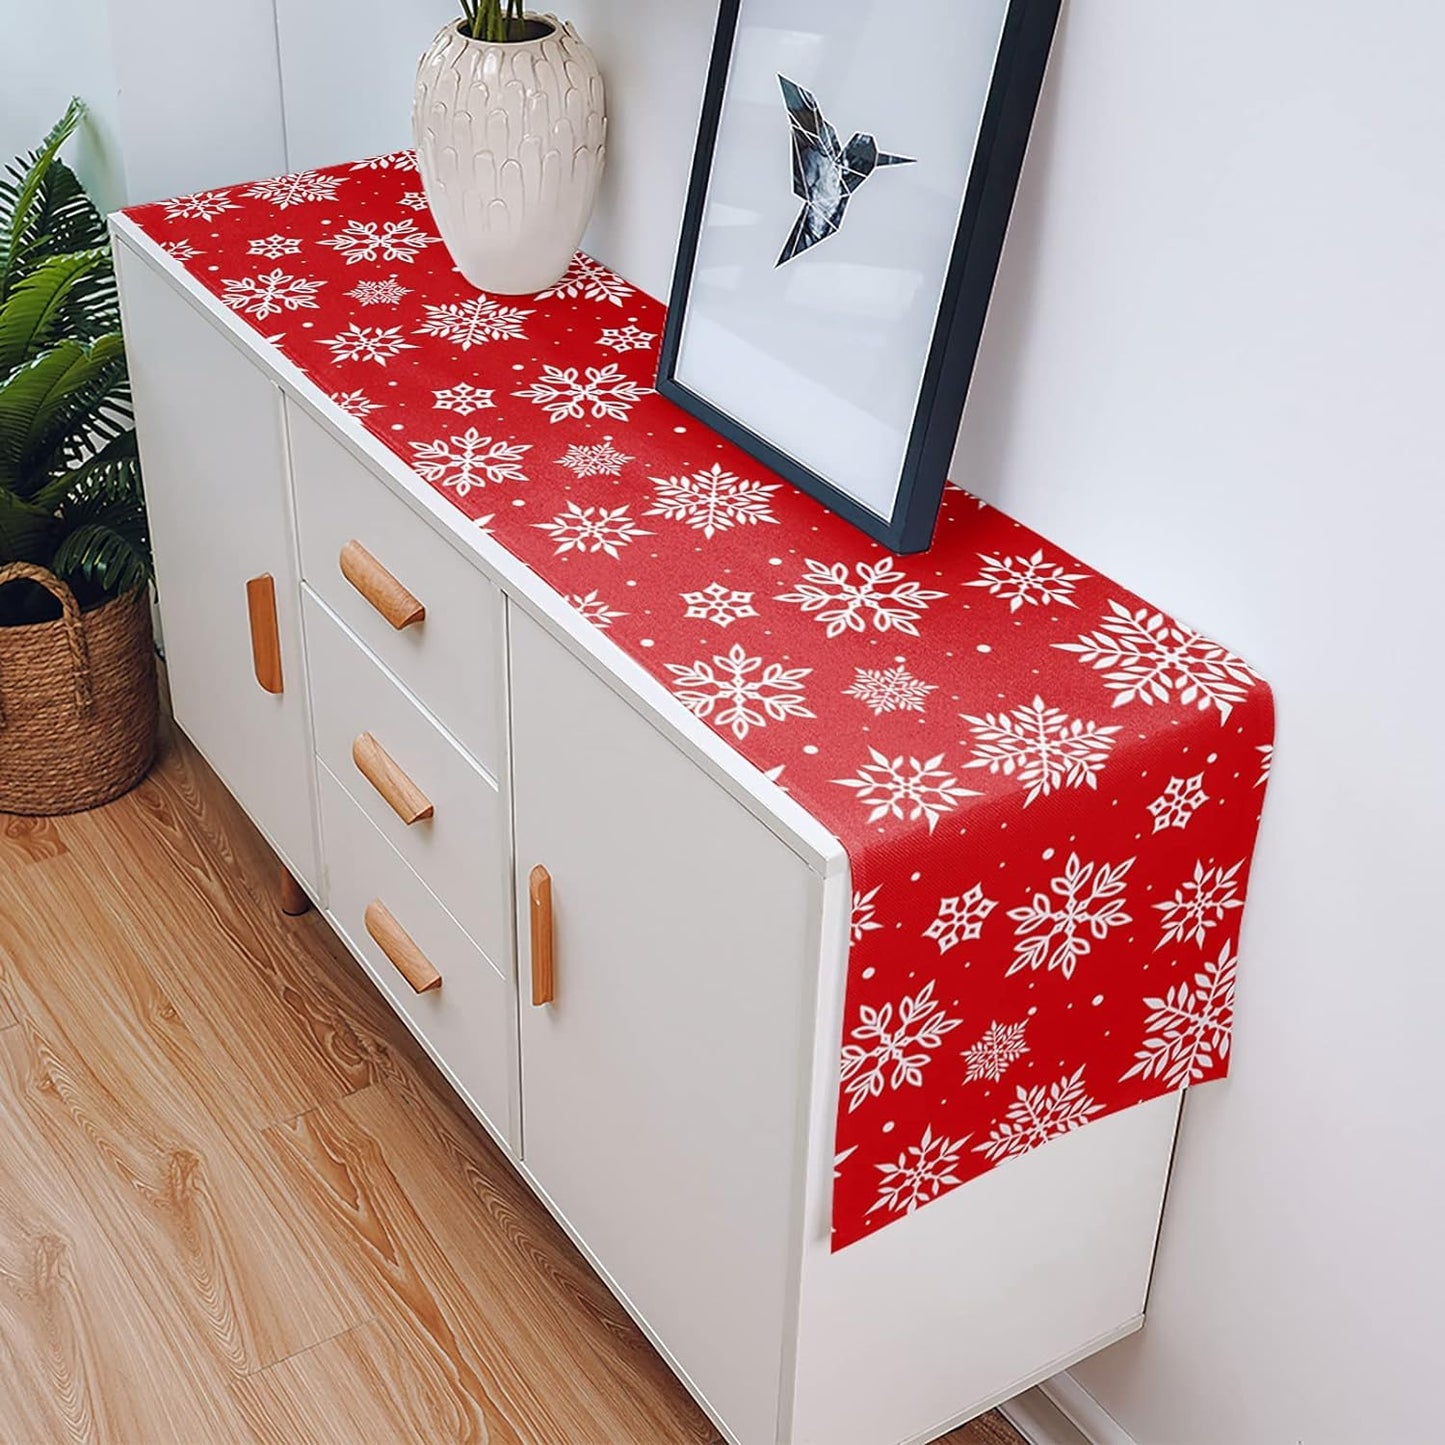 Christmas Runner Cloth for 6 Seater Table